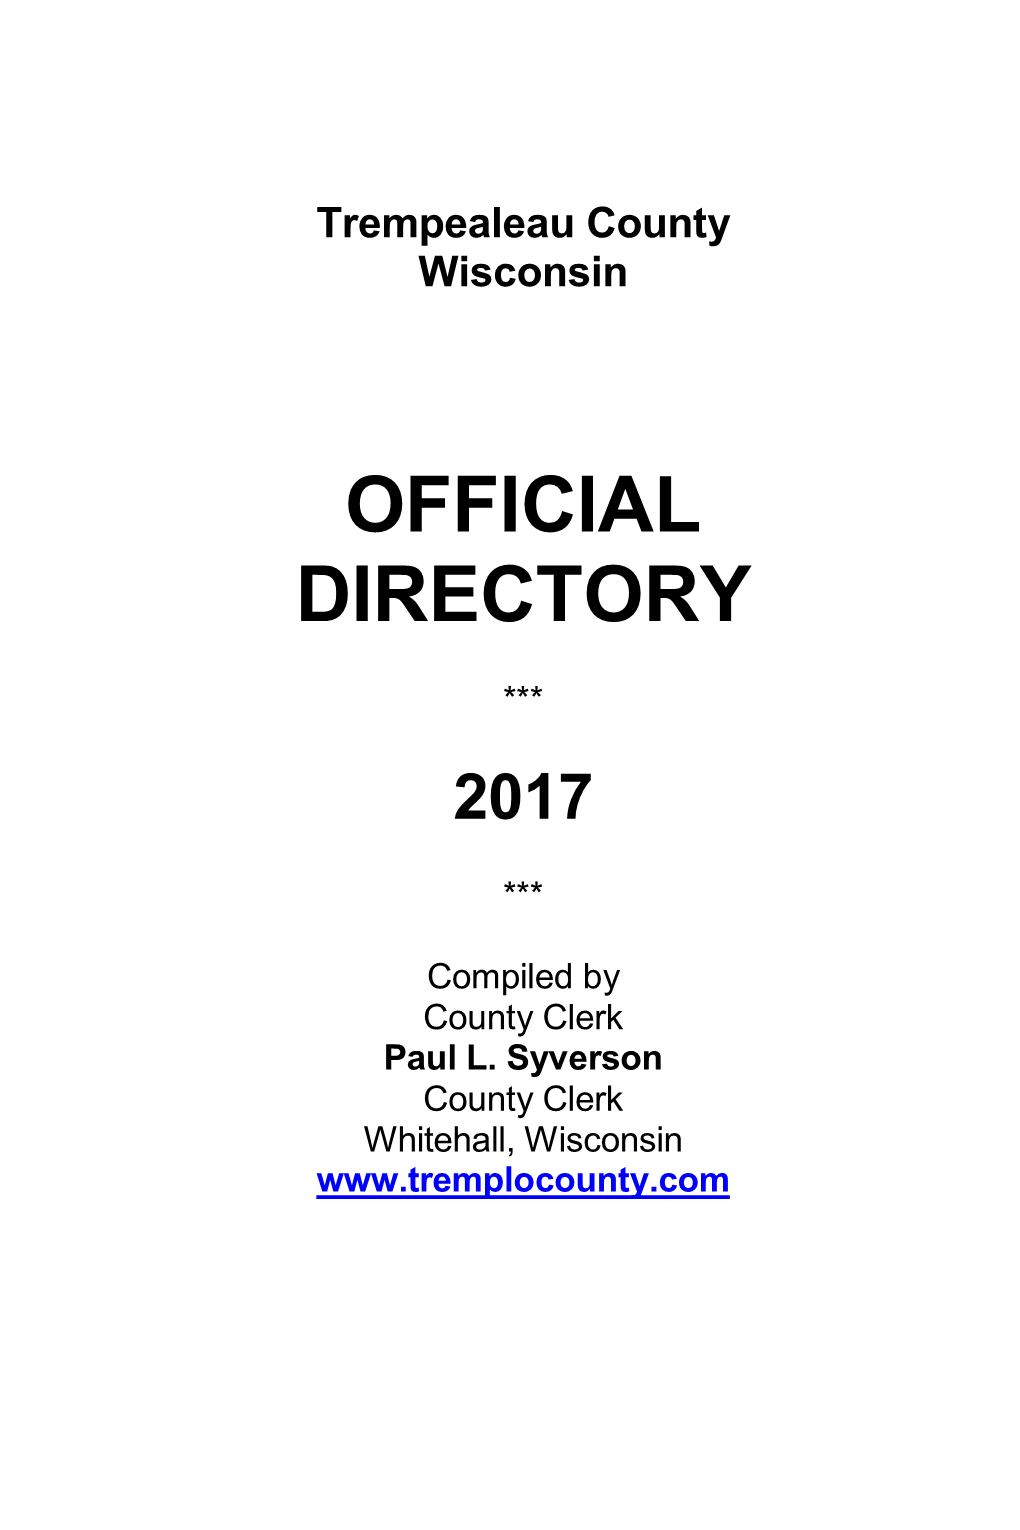 2017 Trempealeau County Official Directory